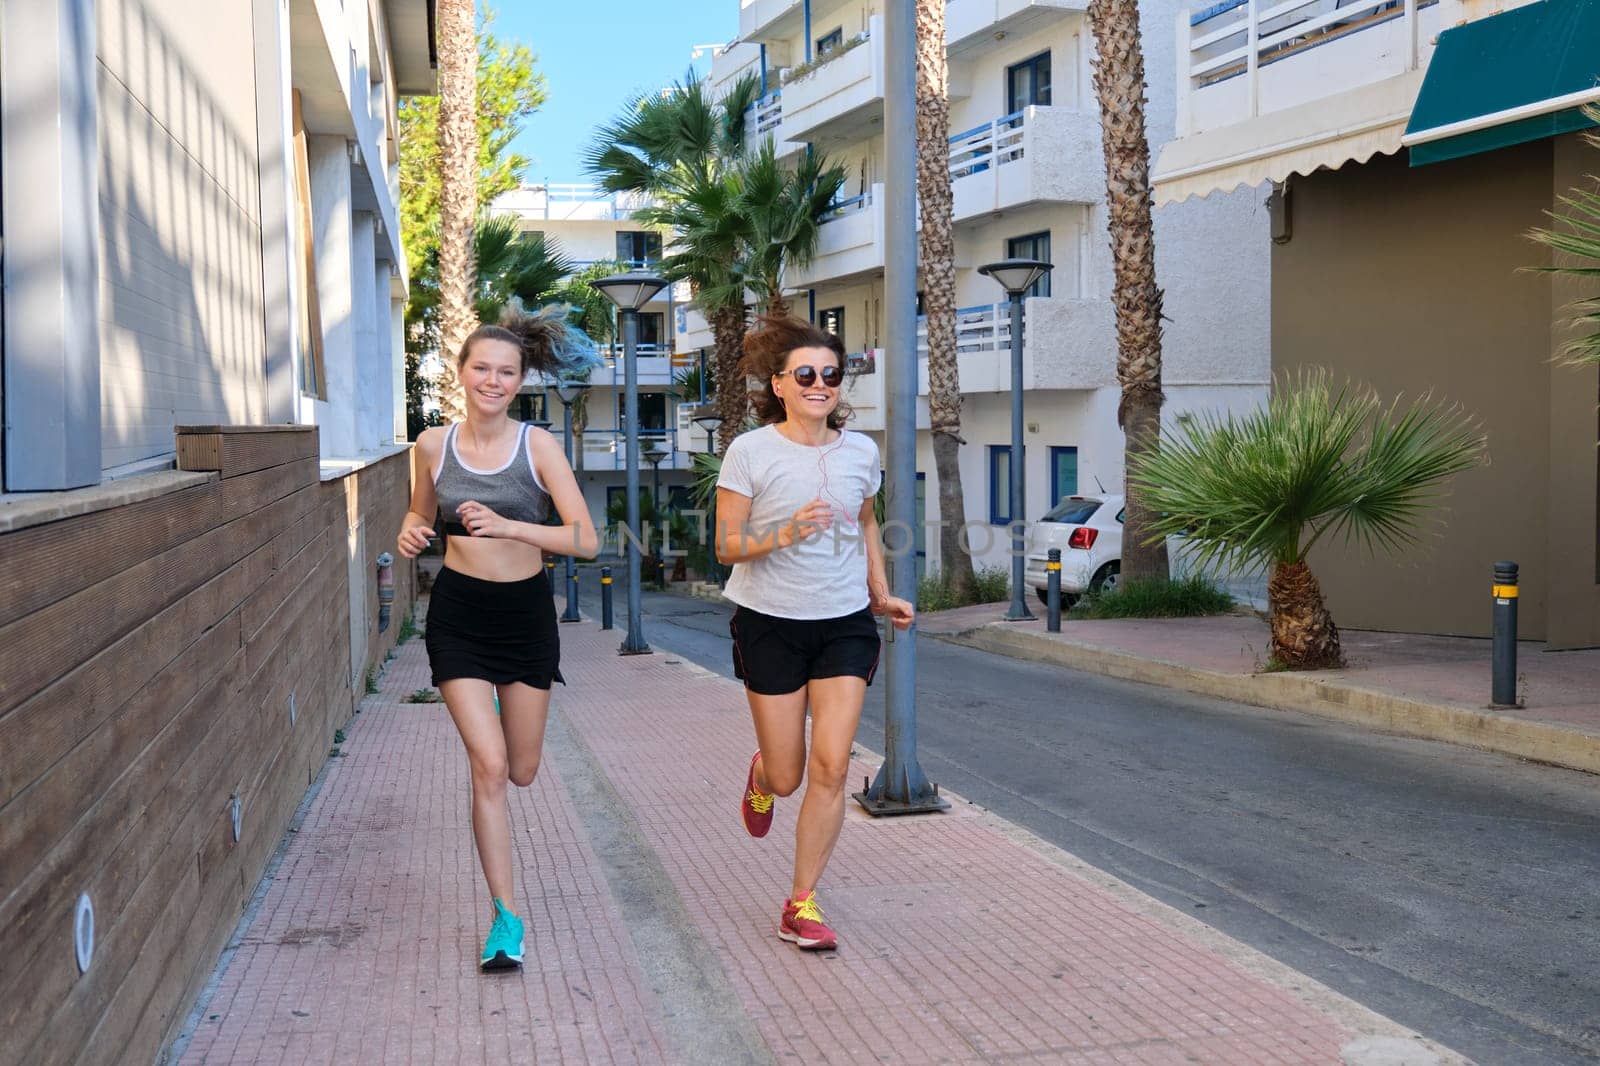 Active friendly sportive family, mother and daughter teenager running together. Tropical city street background, beautiful happy jogging women